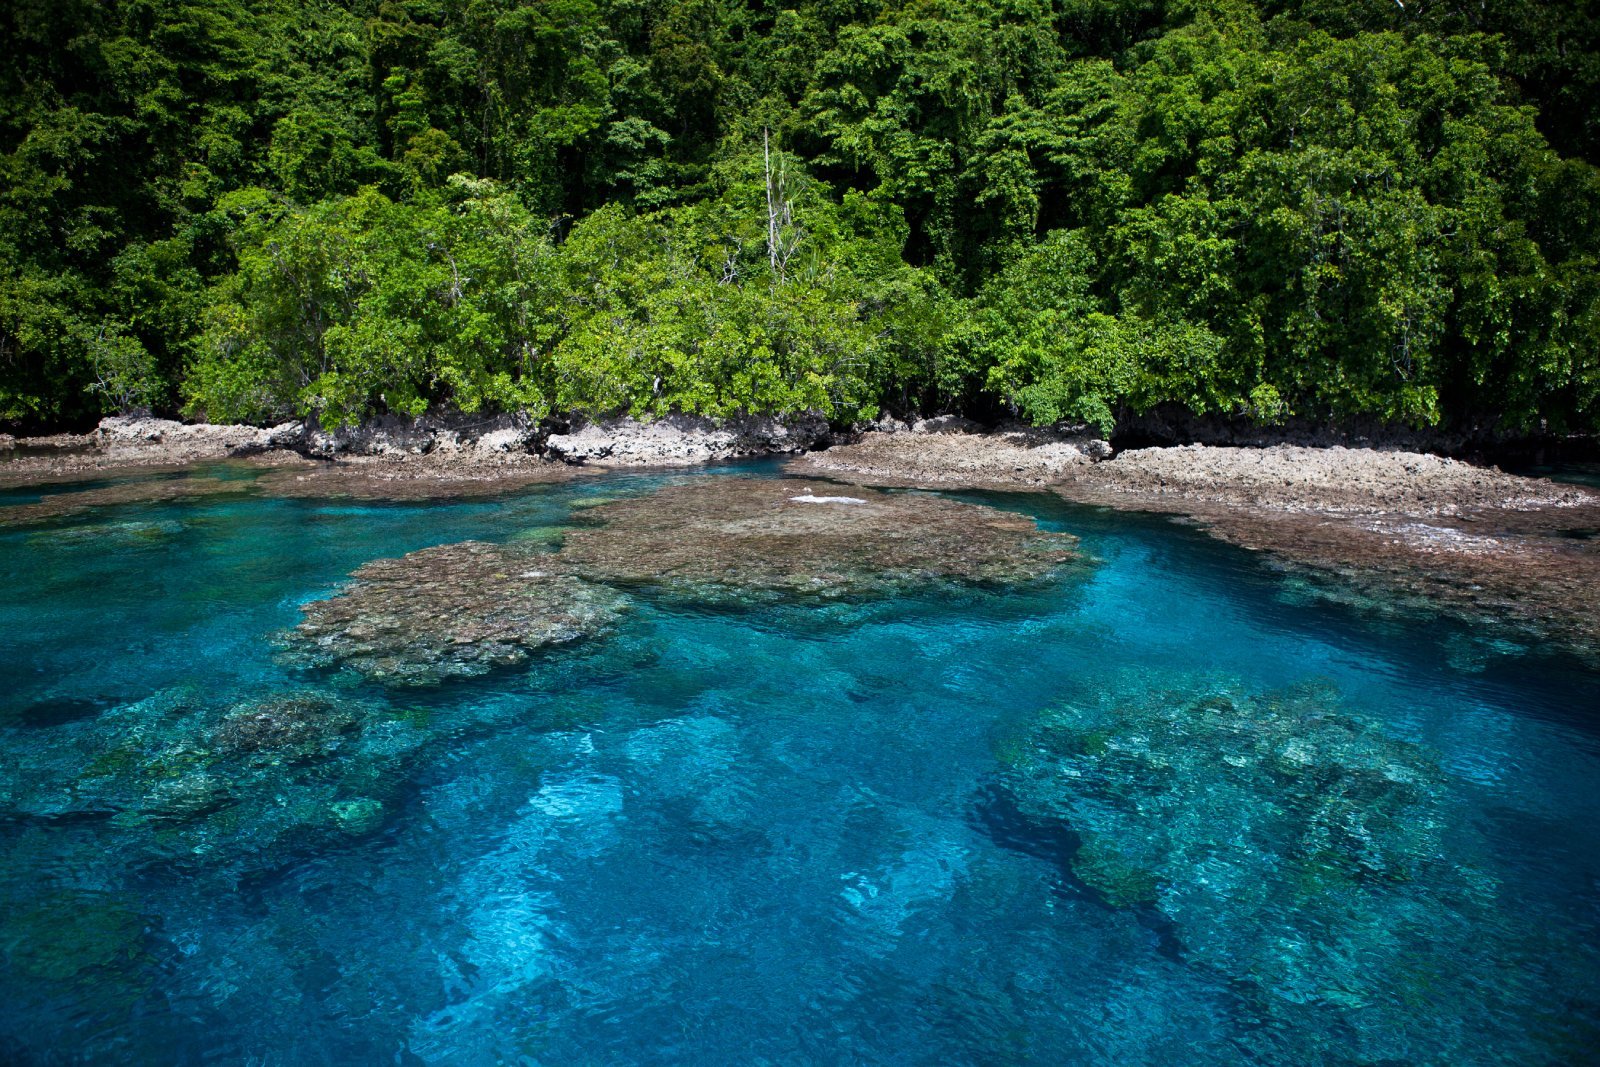 <p> <span>The Solomon Islands, known for their rich biodiversity and WWII history, offer a sustainable travel experience rooted in nature and heritage. The islands’ commitment to preserving their ecosystems is seen in their protected marine areas and community conservation efforts.</span></p> <p><span>Visitors can explore coral reefs, WWII relics, and traditional villages. The Solomon Islands also offer opportunities for cultural immersion, including traditional dance and music.</span></p> <p><b>Insider’s Tip: </b><span>Dive or snorkel at the Florida Islands to explore pristine coral reefs and WWII wrecks.</span></p> <p><b>When To Travel: </b><span>April to November for the best weather for outdoor activities.</span></p> <p><b>How To Get There: </b><span>Fly into Honiara International Airport from Australia or Fiji.</span></p>